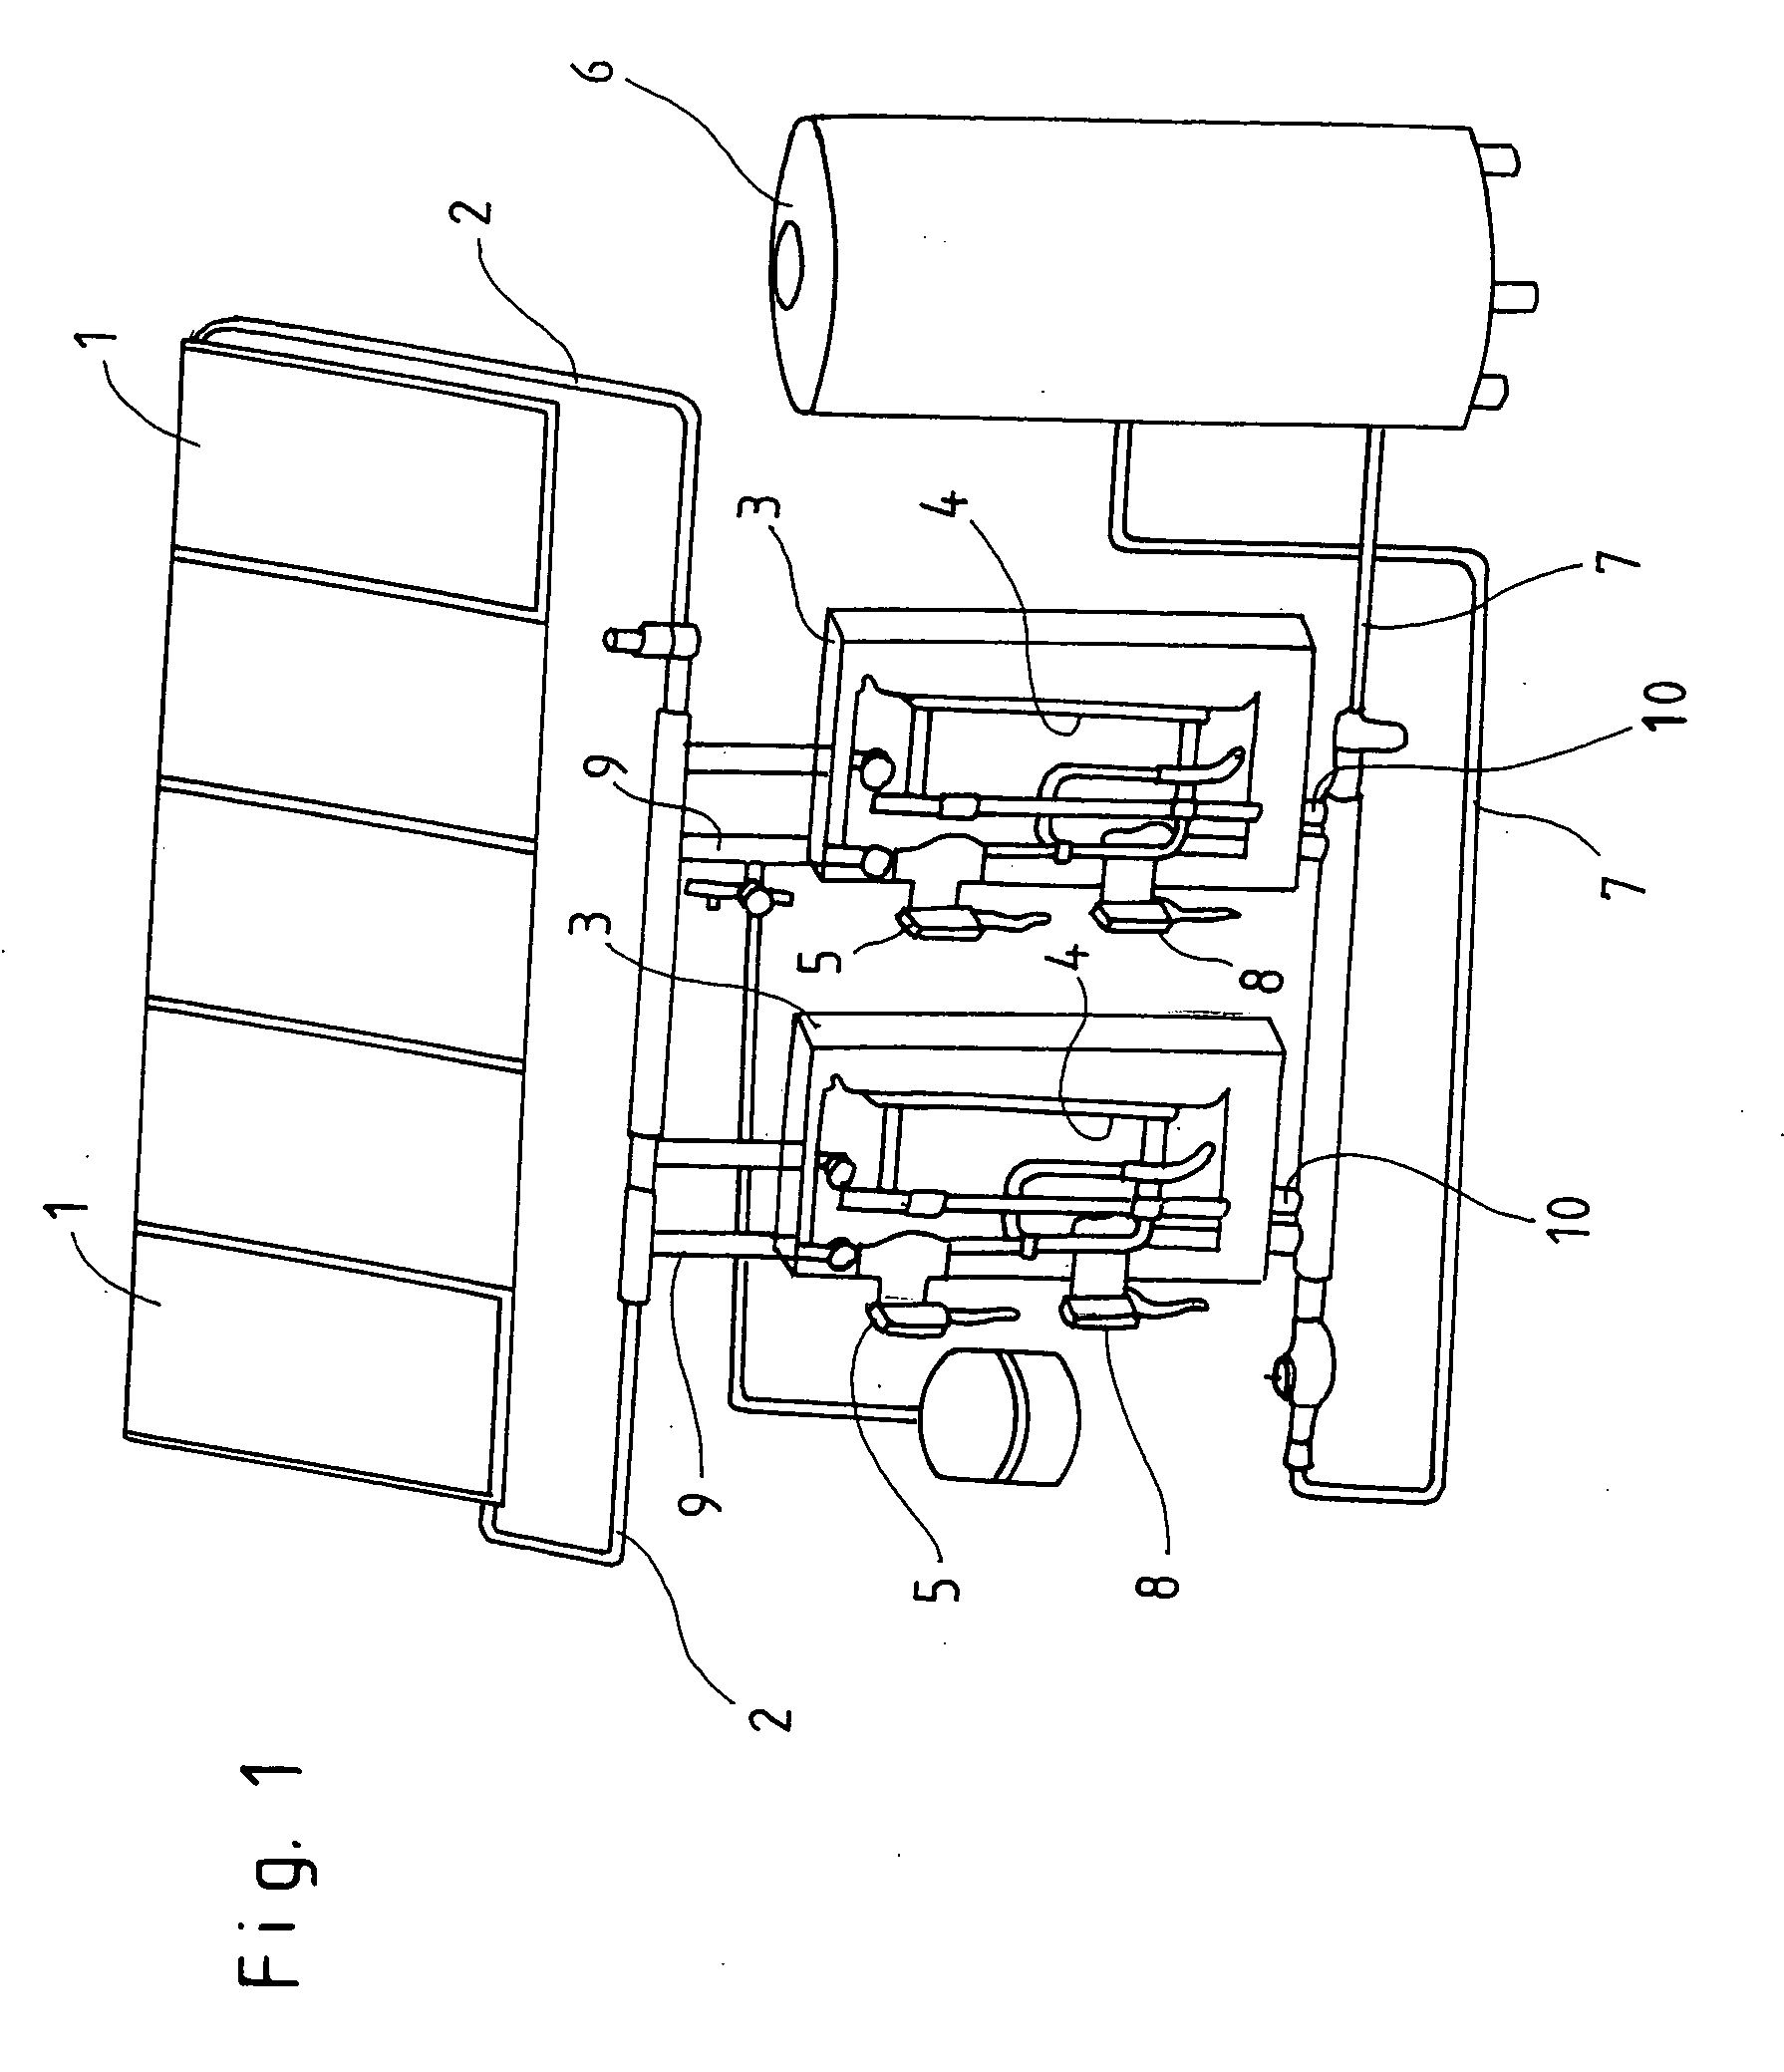 Solar Heat Powered System comprising at least one solar collector